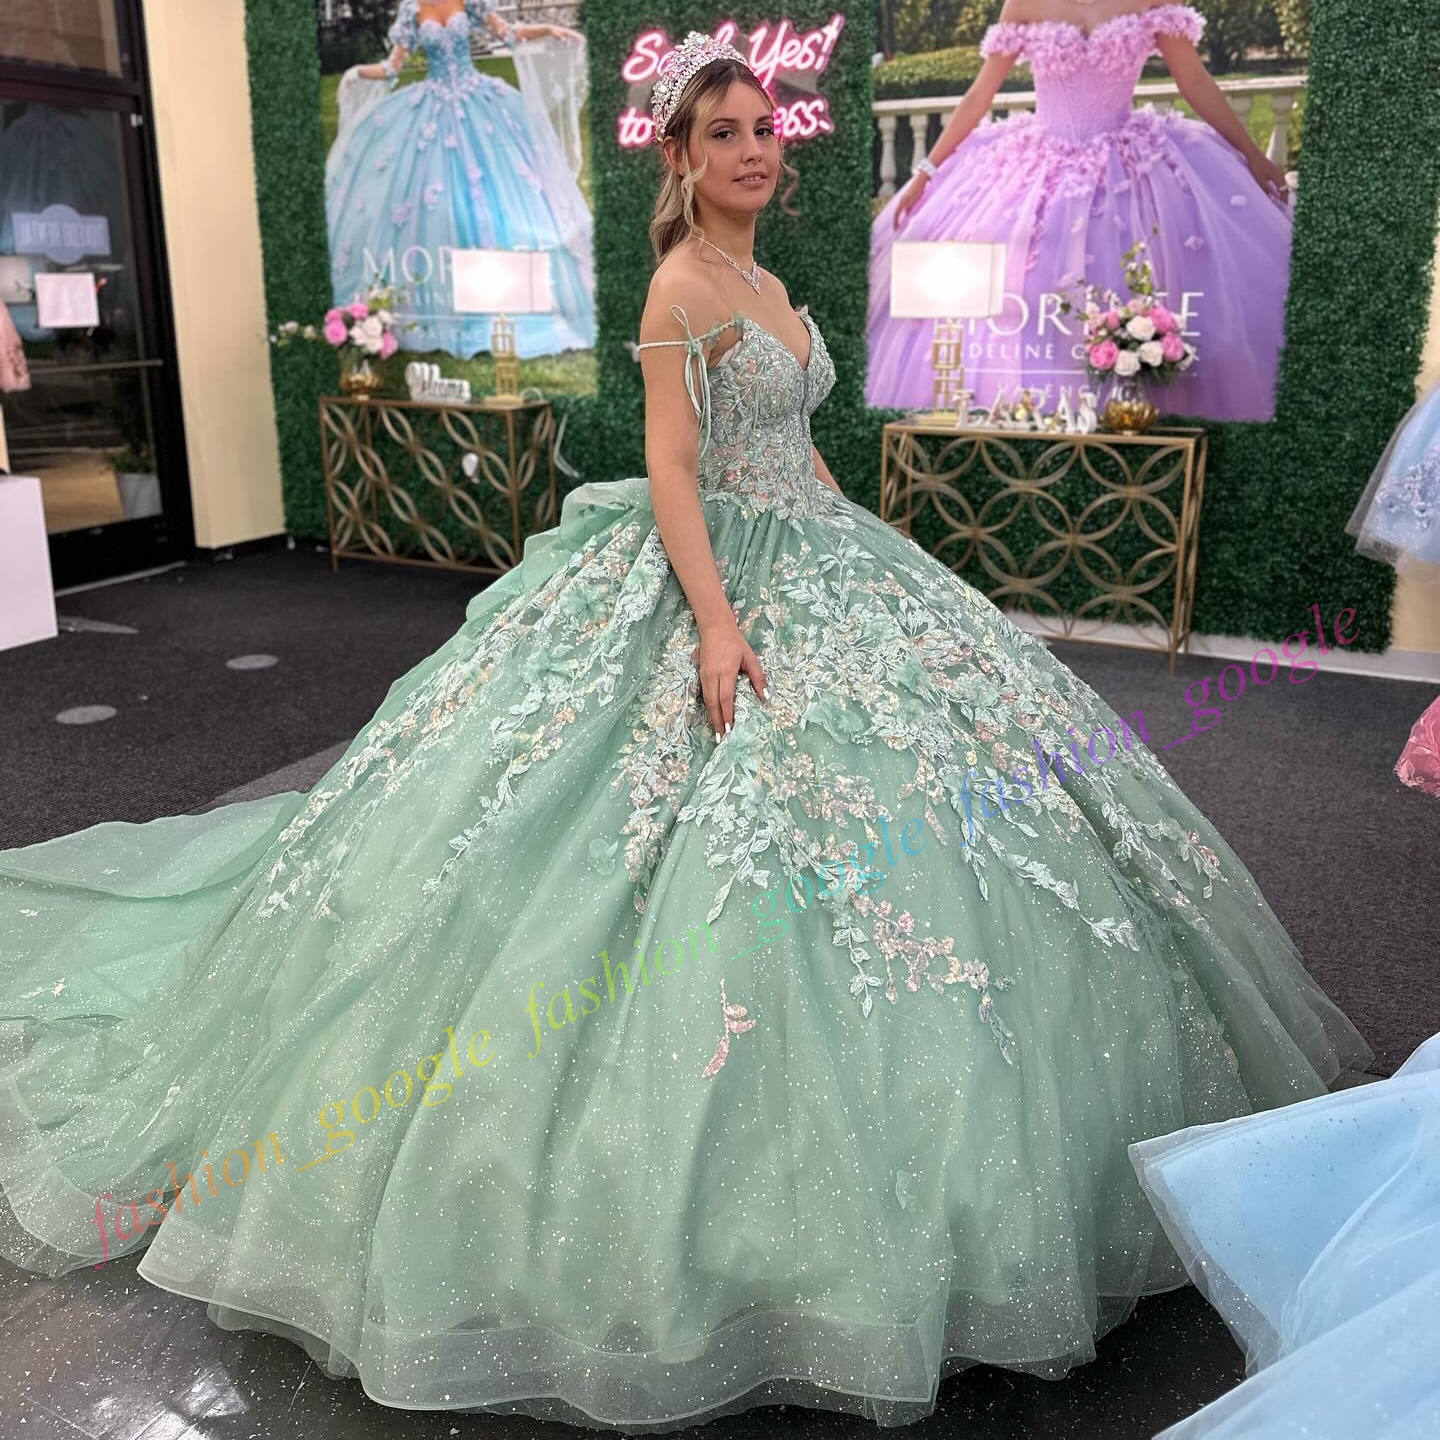 3D Floral Sequin Quinceanera Dress Glitter Tulle Ball Quince Quince Sweet 15/16 Birthday Party Bret